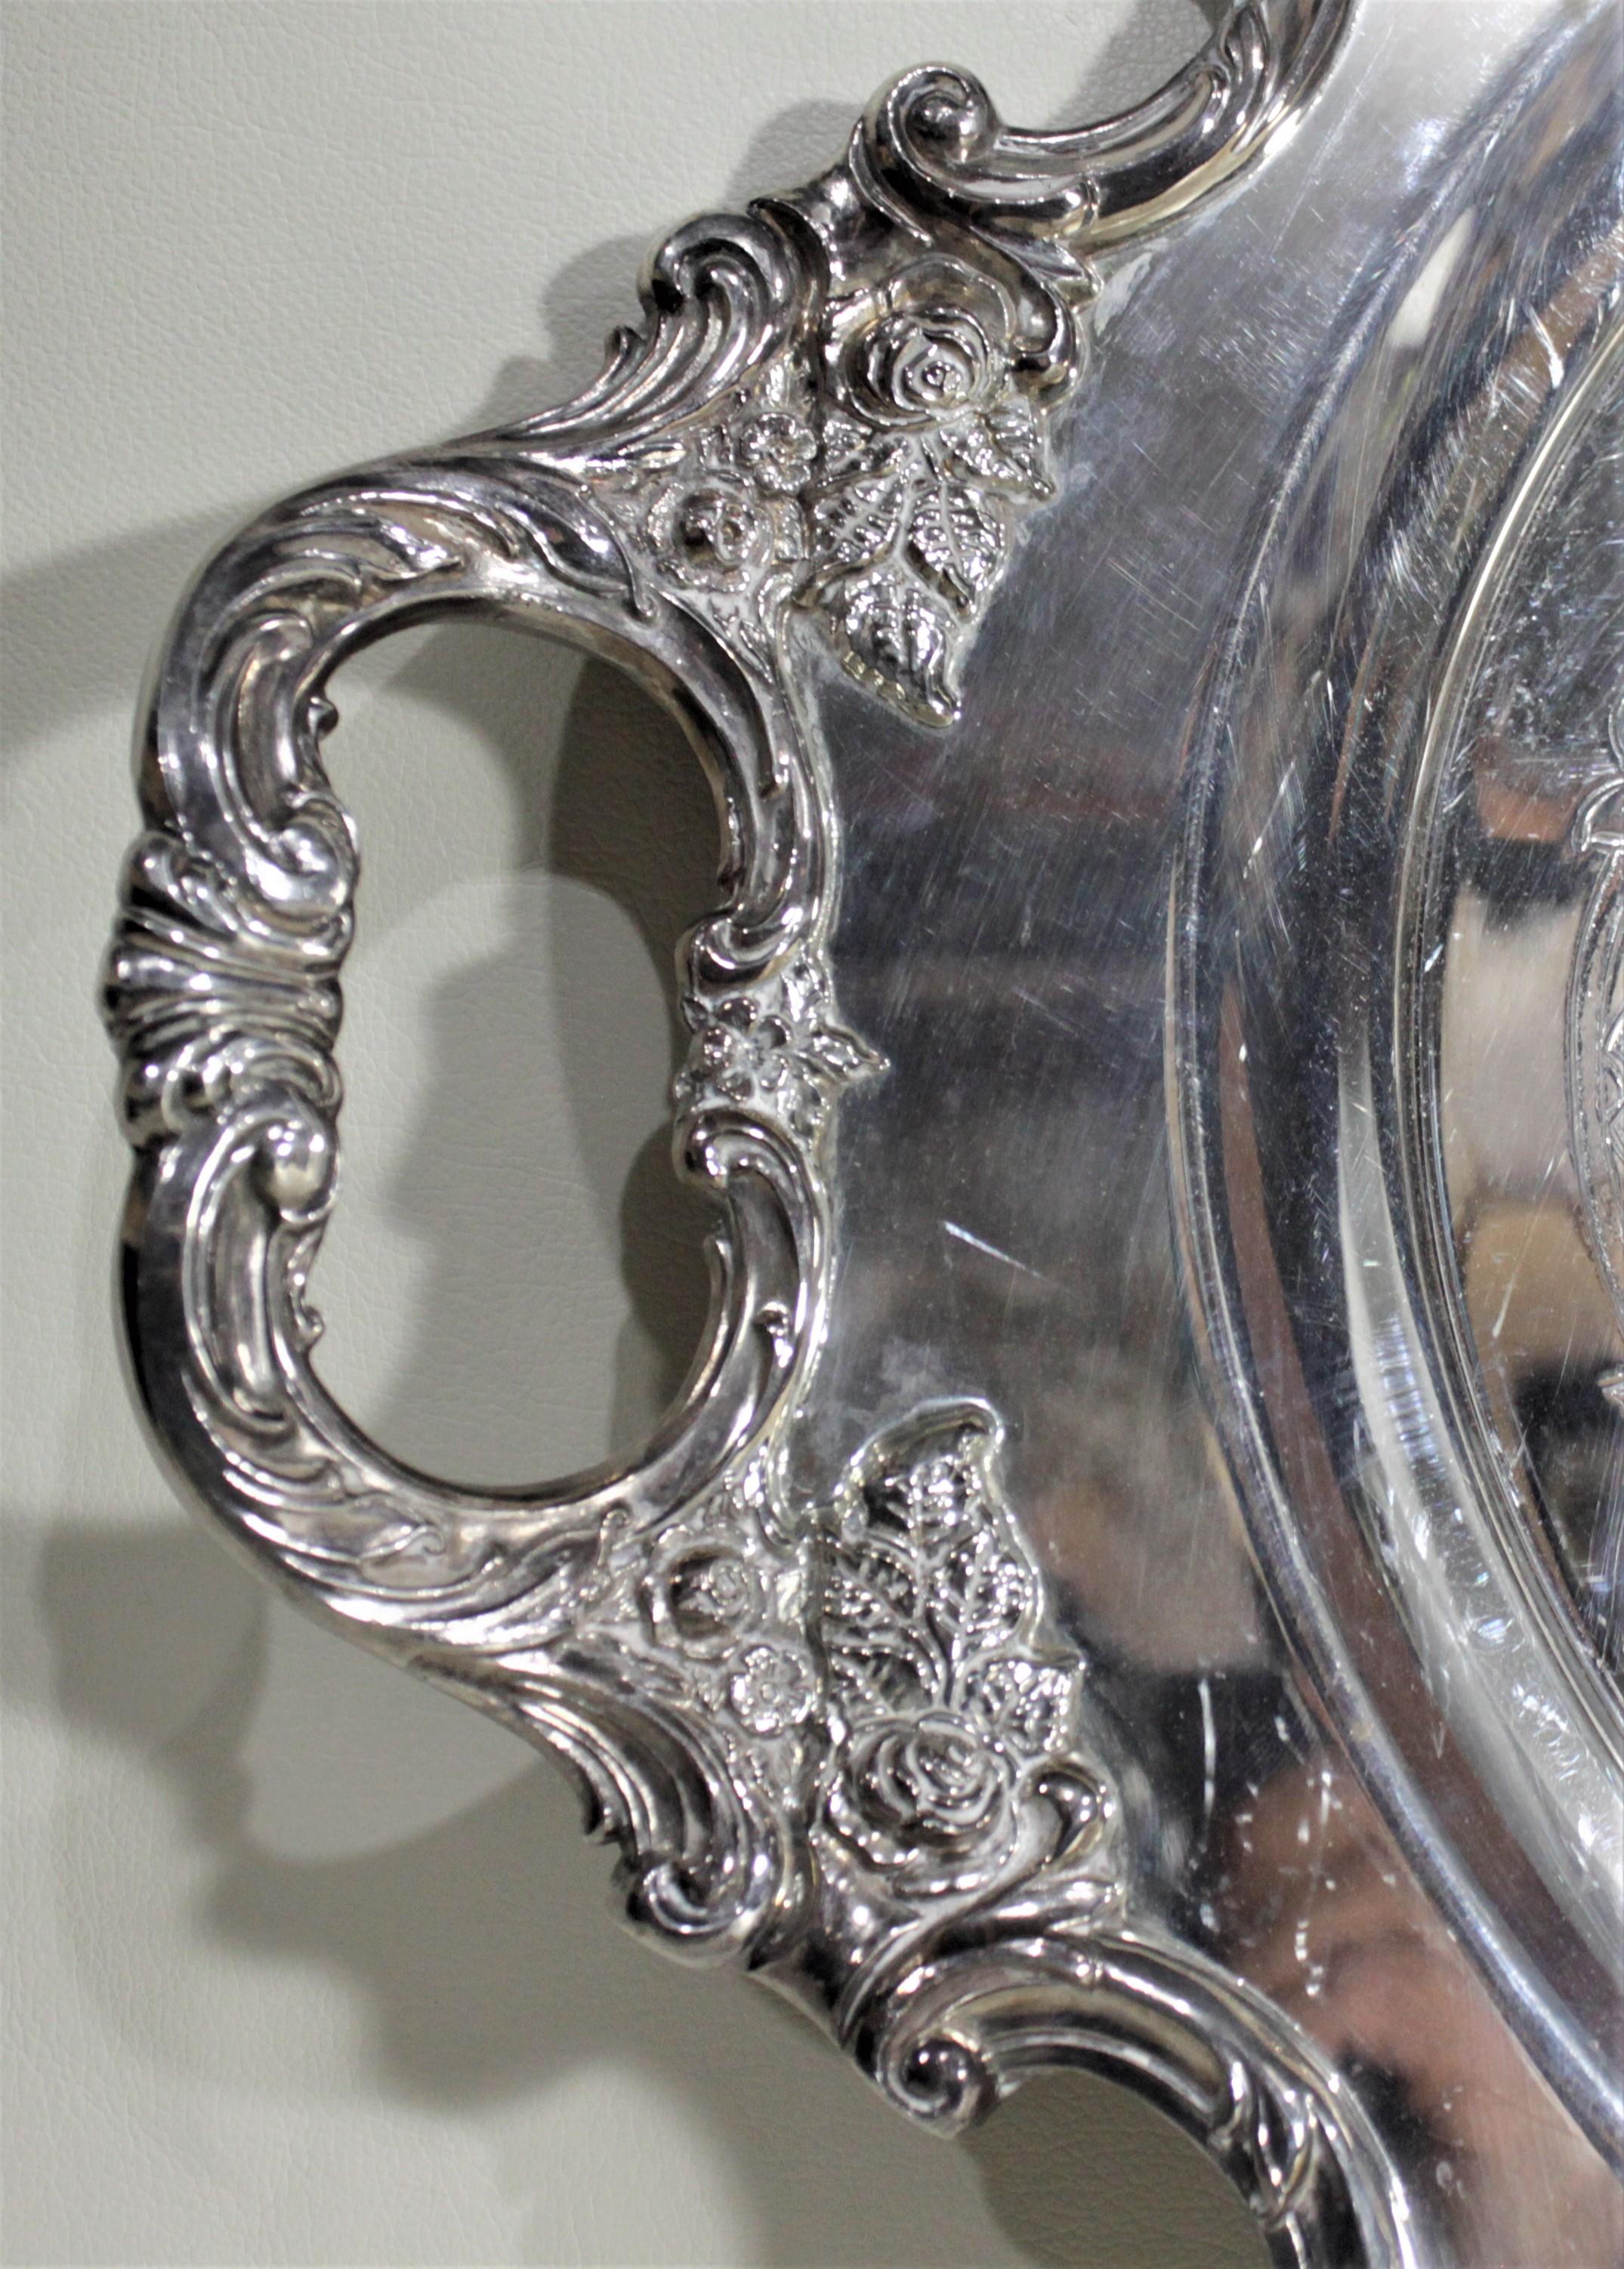 Antique Wallace Silver Plated Oval Serving Tray with Floral Decoration In Good Condition For Sale In Hamilton, Ontario